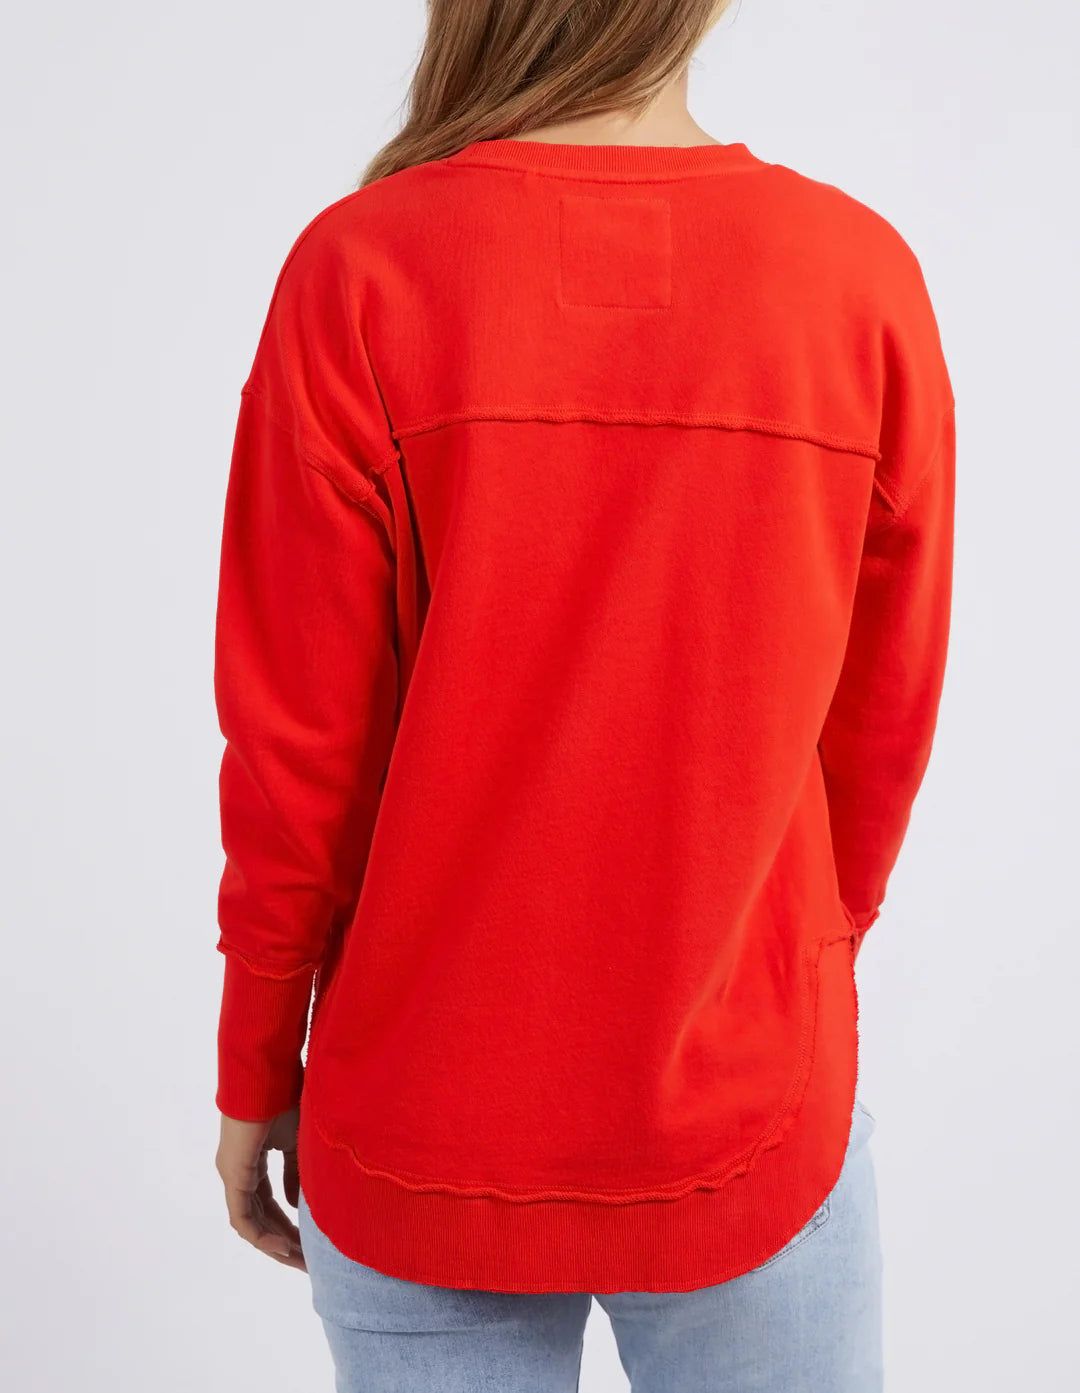 Simplified Crew - Bright Red